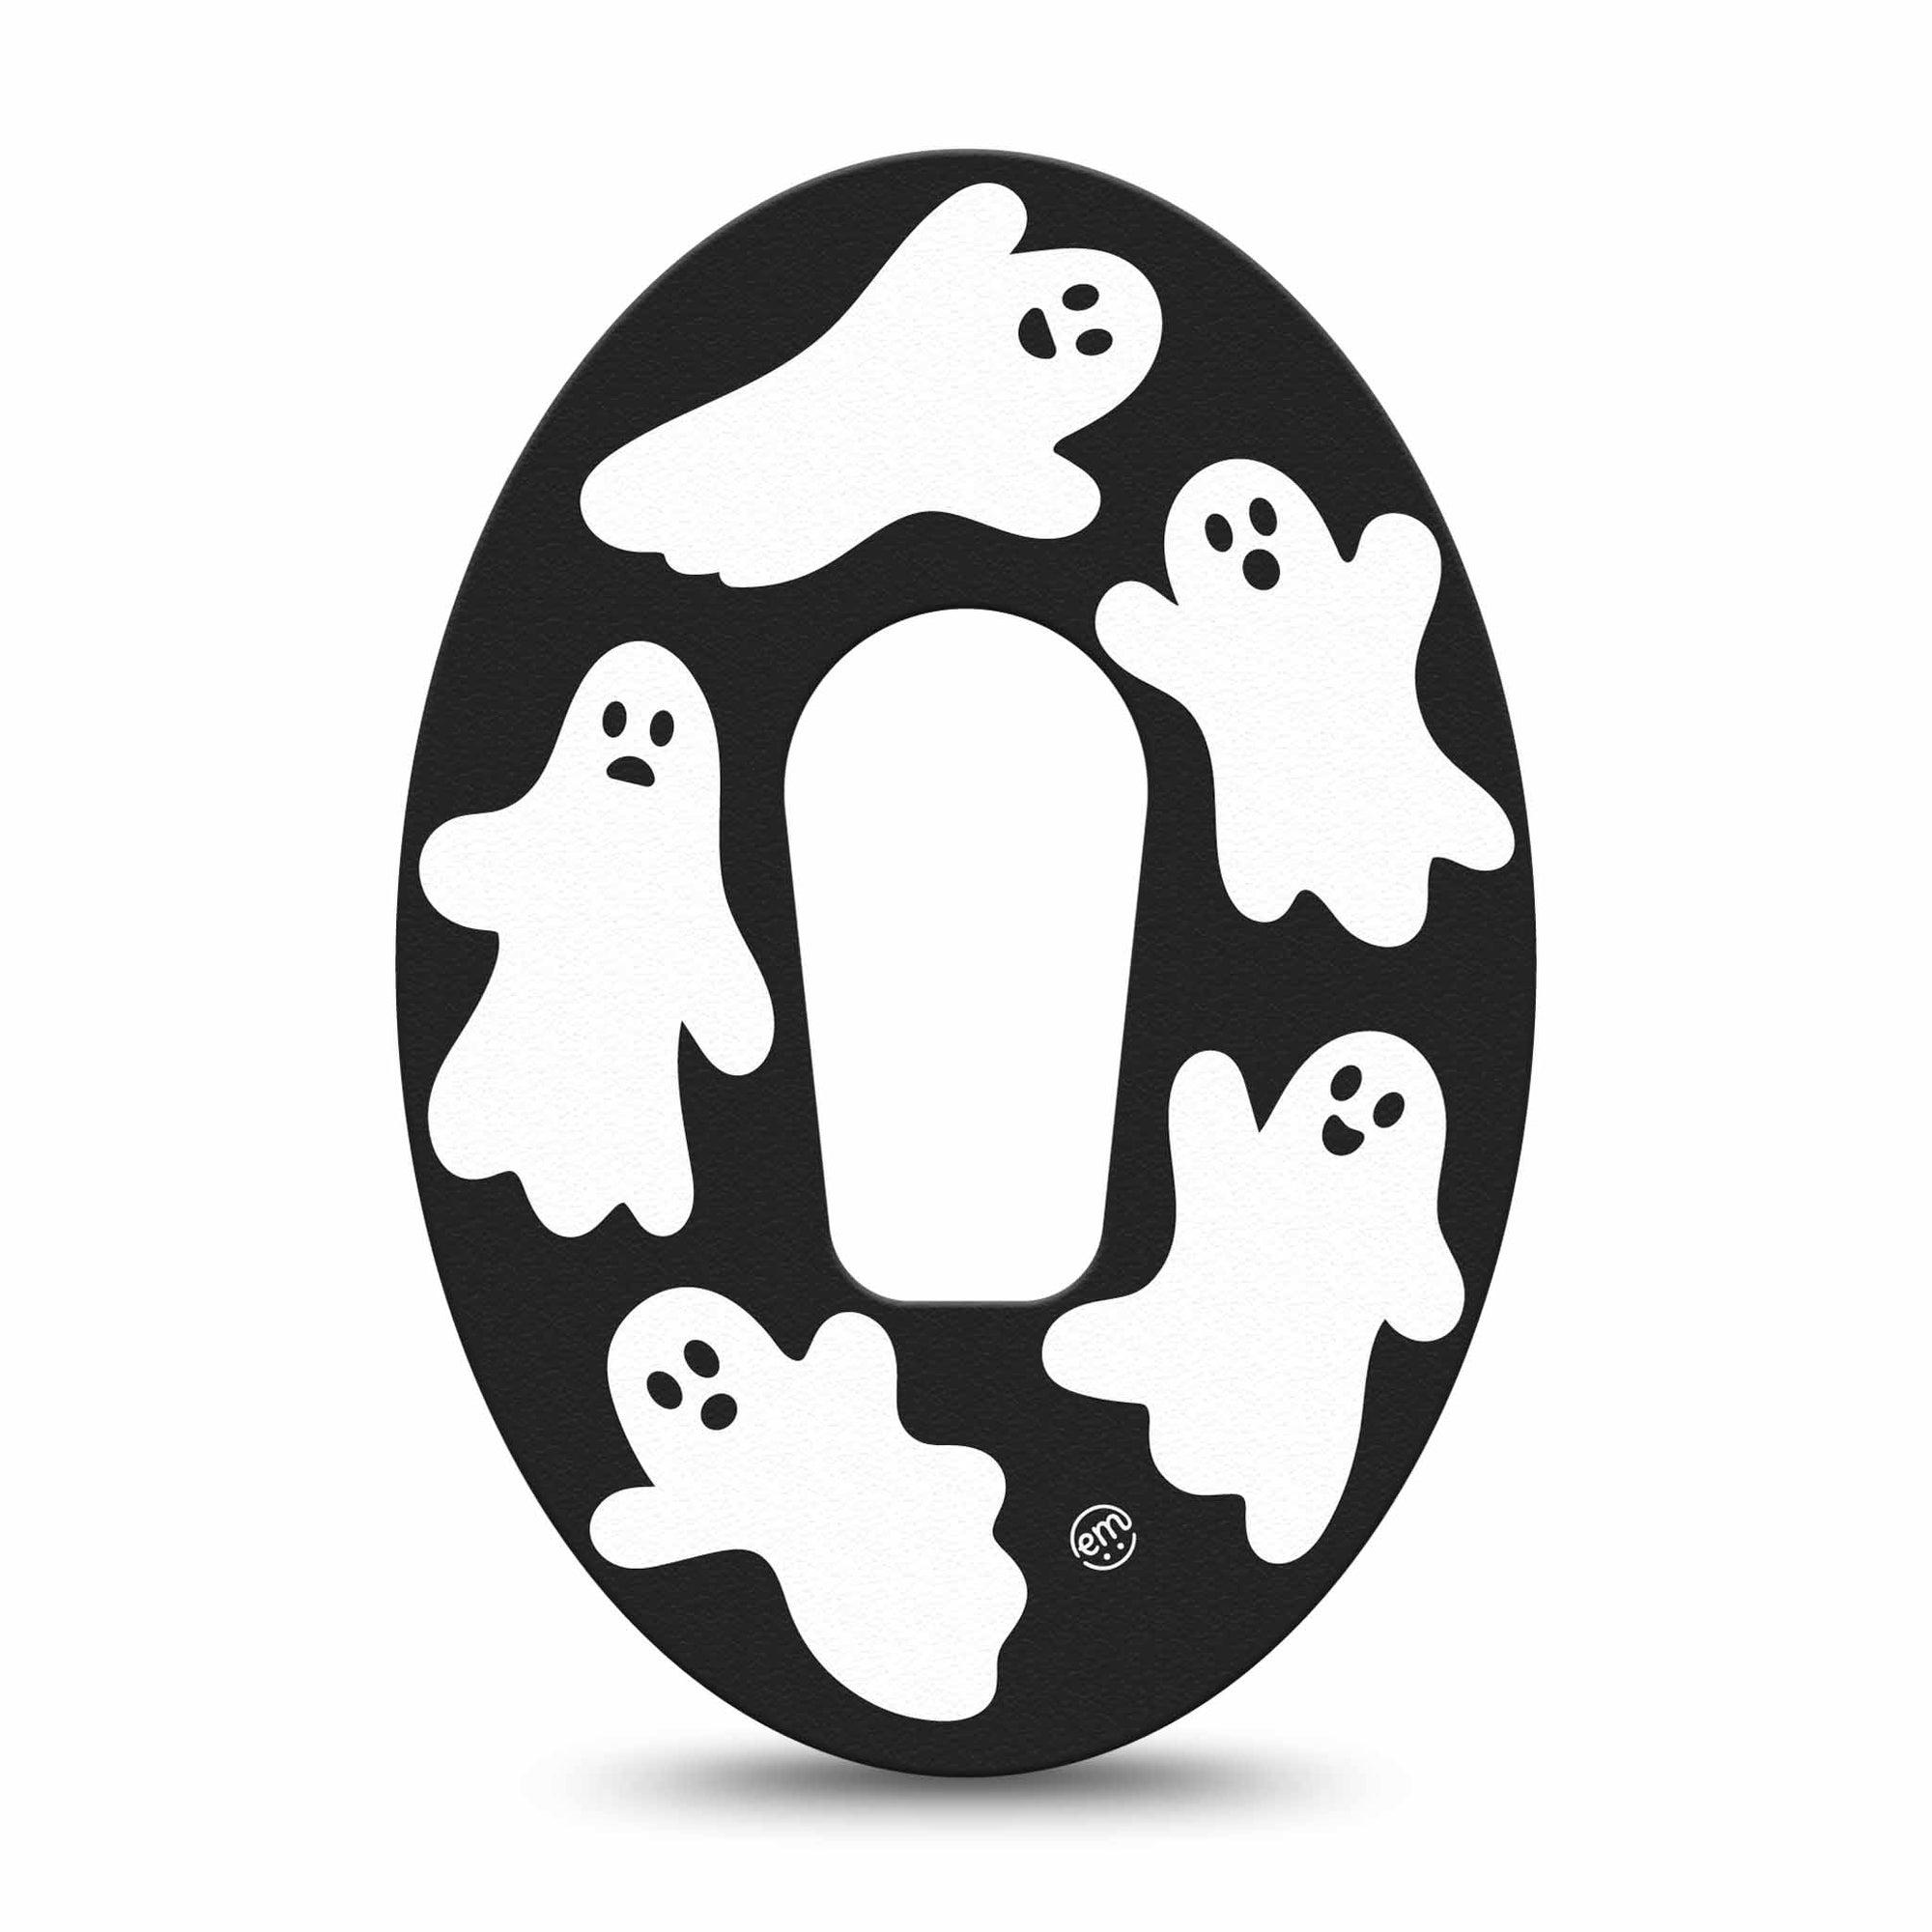 ExpressionMed ExpressionMed, Ghost Dexcom G6 Tape, Single Tape, Spooky ghost Themed CGM Overlay Design